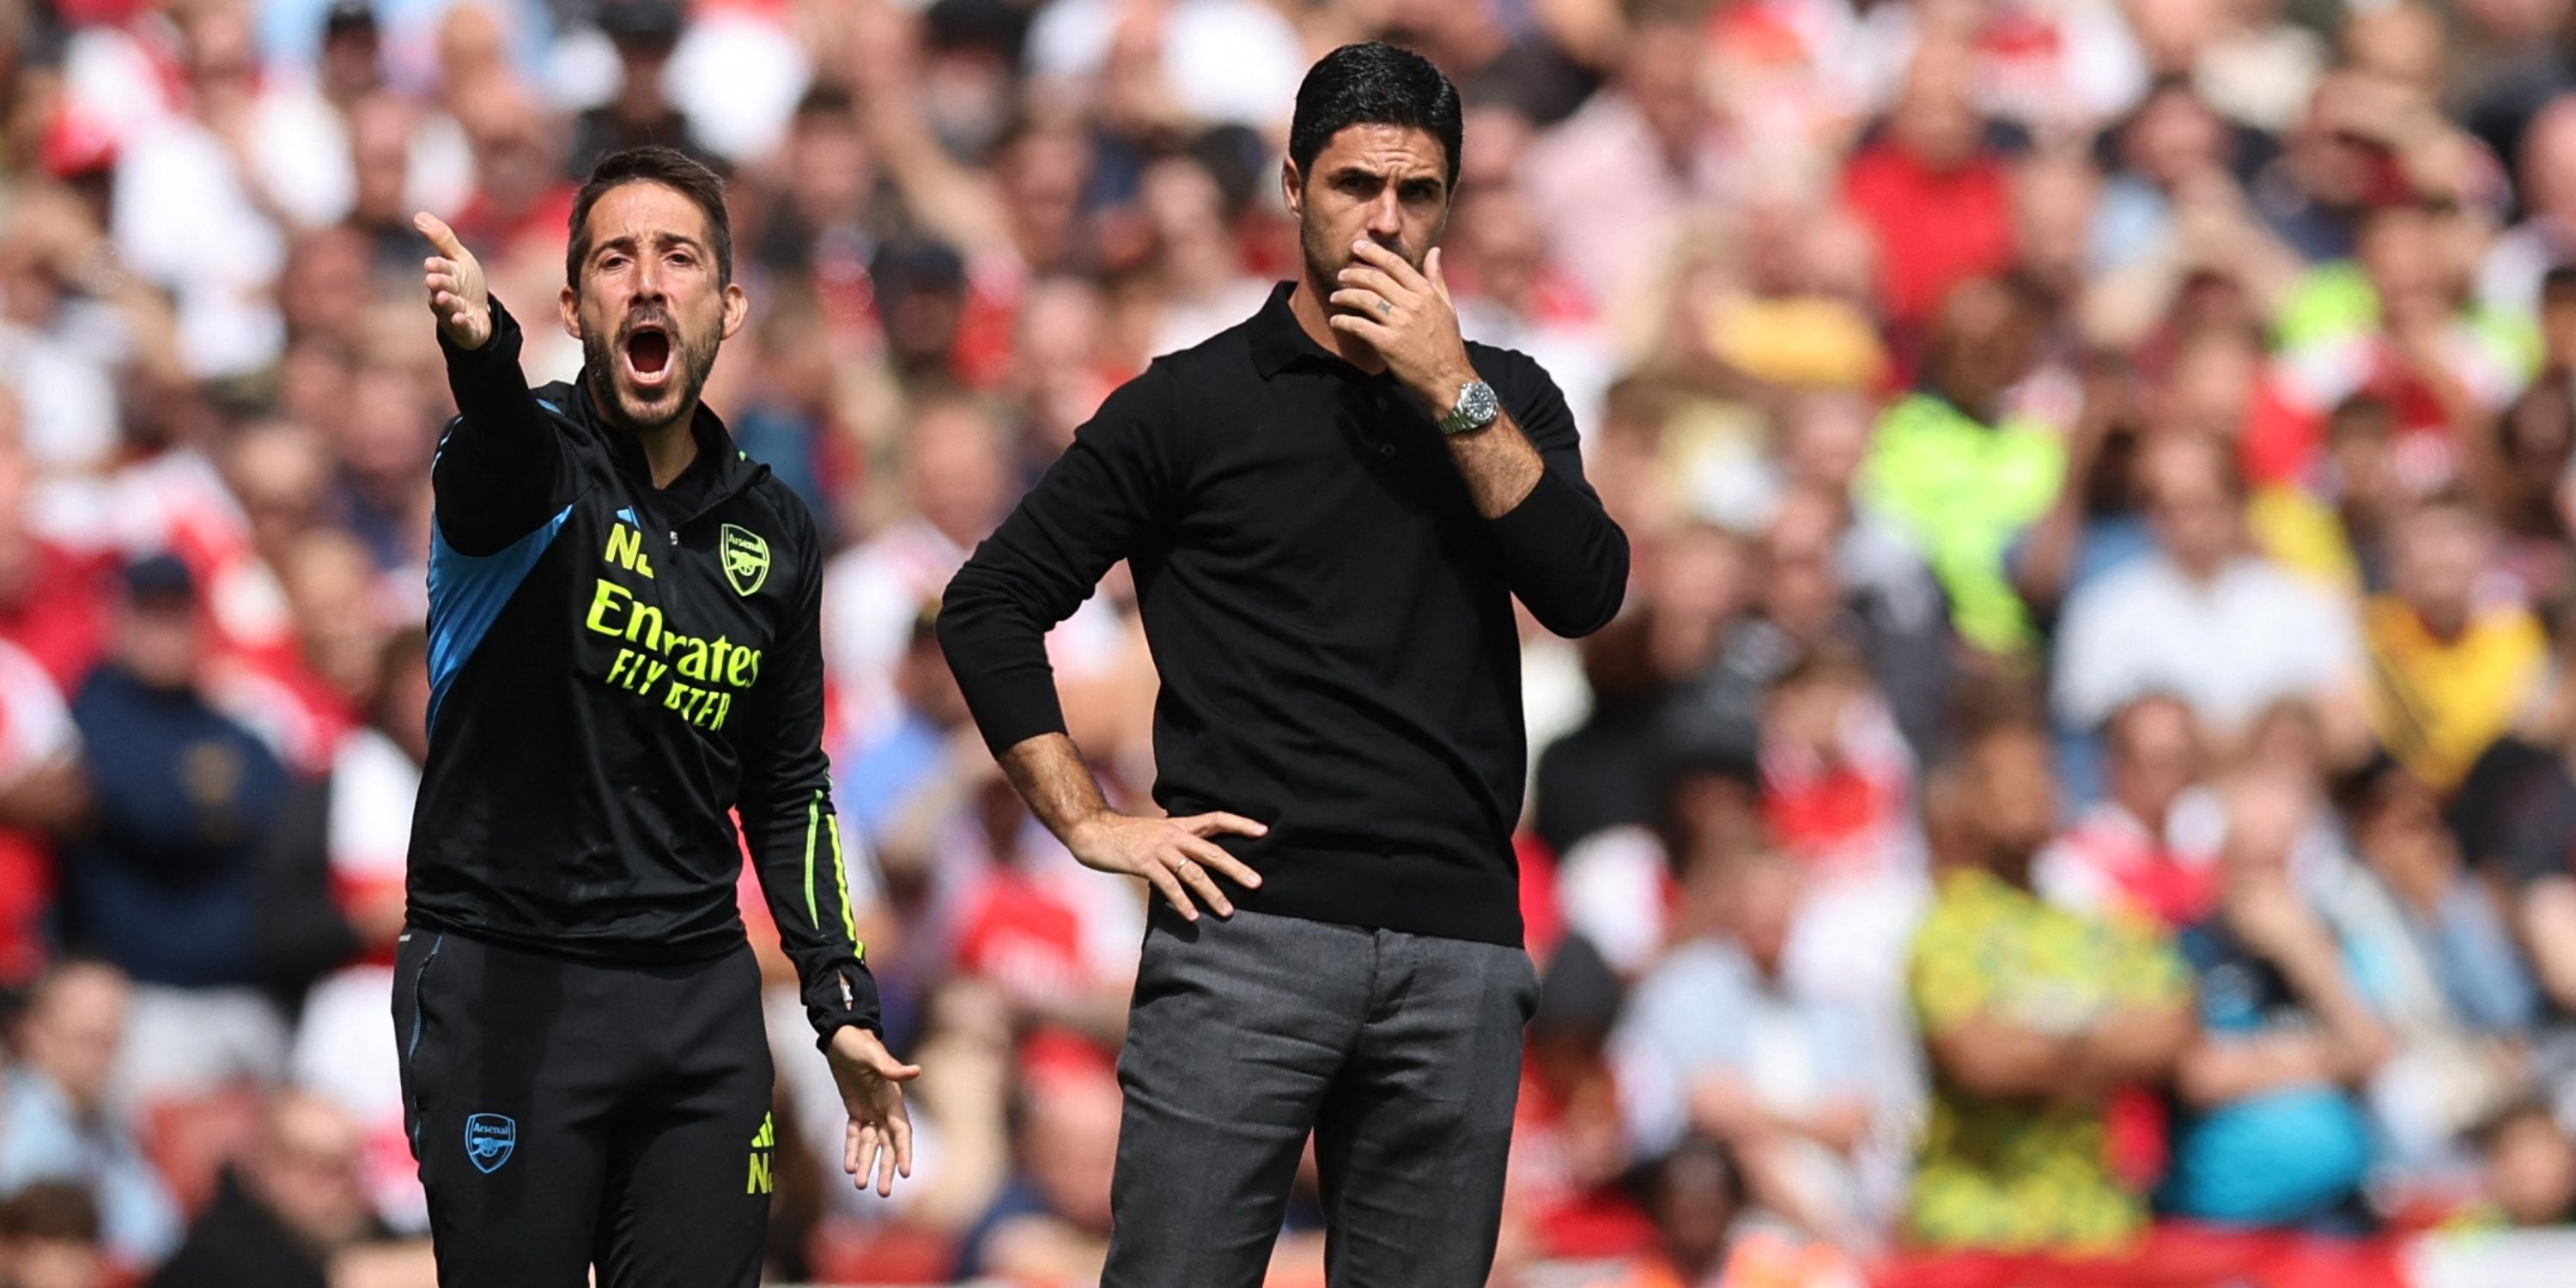 Arteta makes move to sign "exciting player" for Arsenal, Odegaard loves him